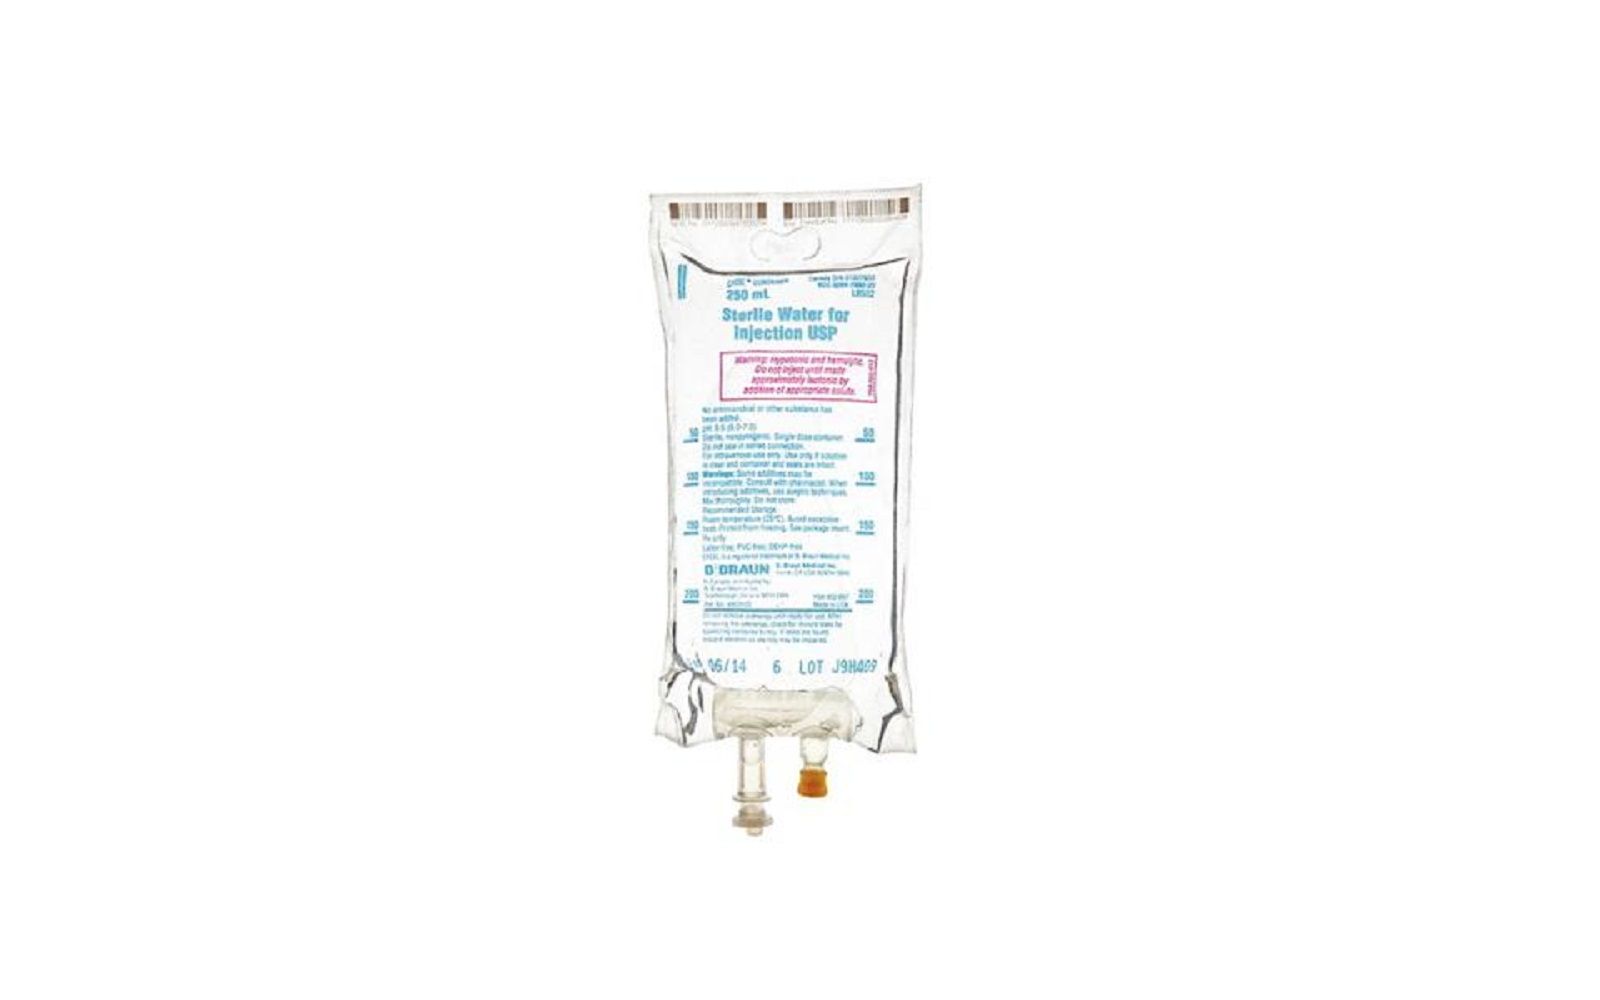 Sterile water for injection, usp – preservative free, diluent, flexible bag 250 ml, ndc 00264-7850-20